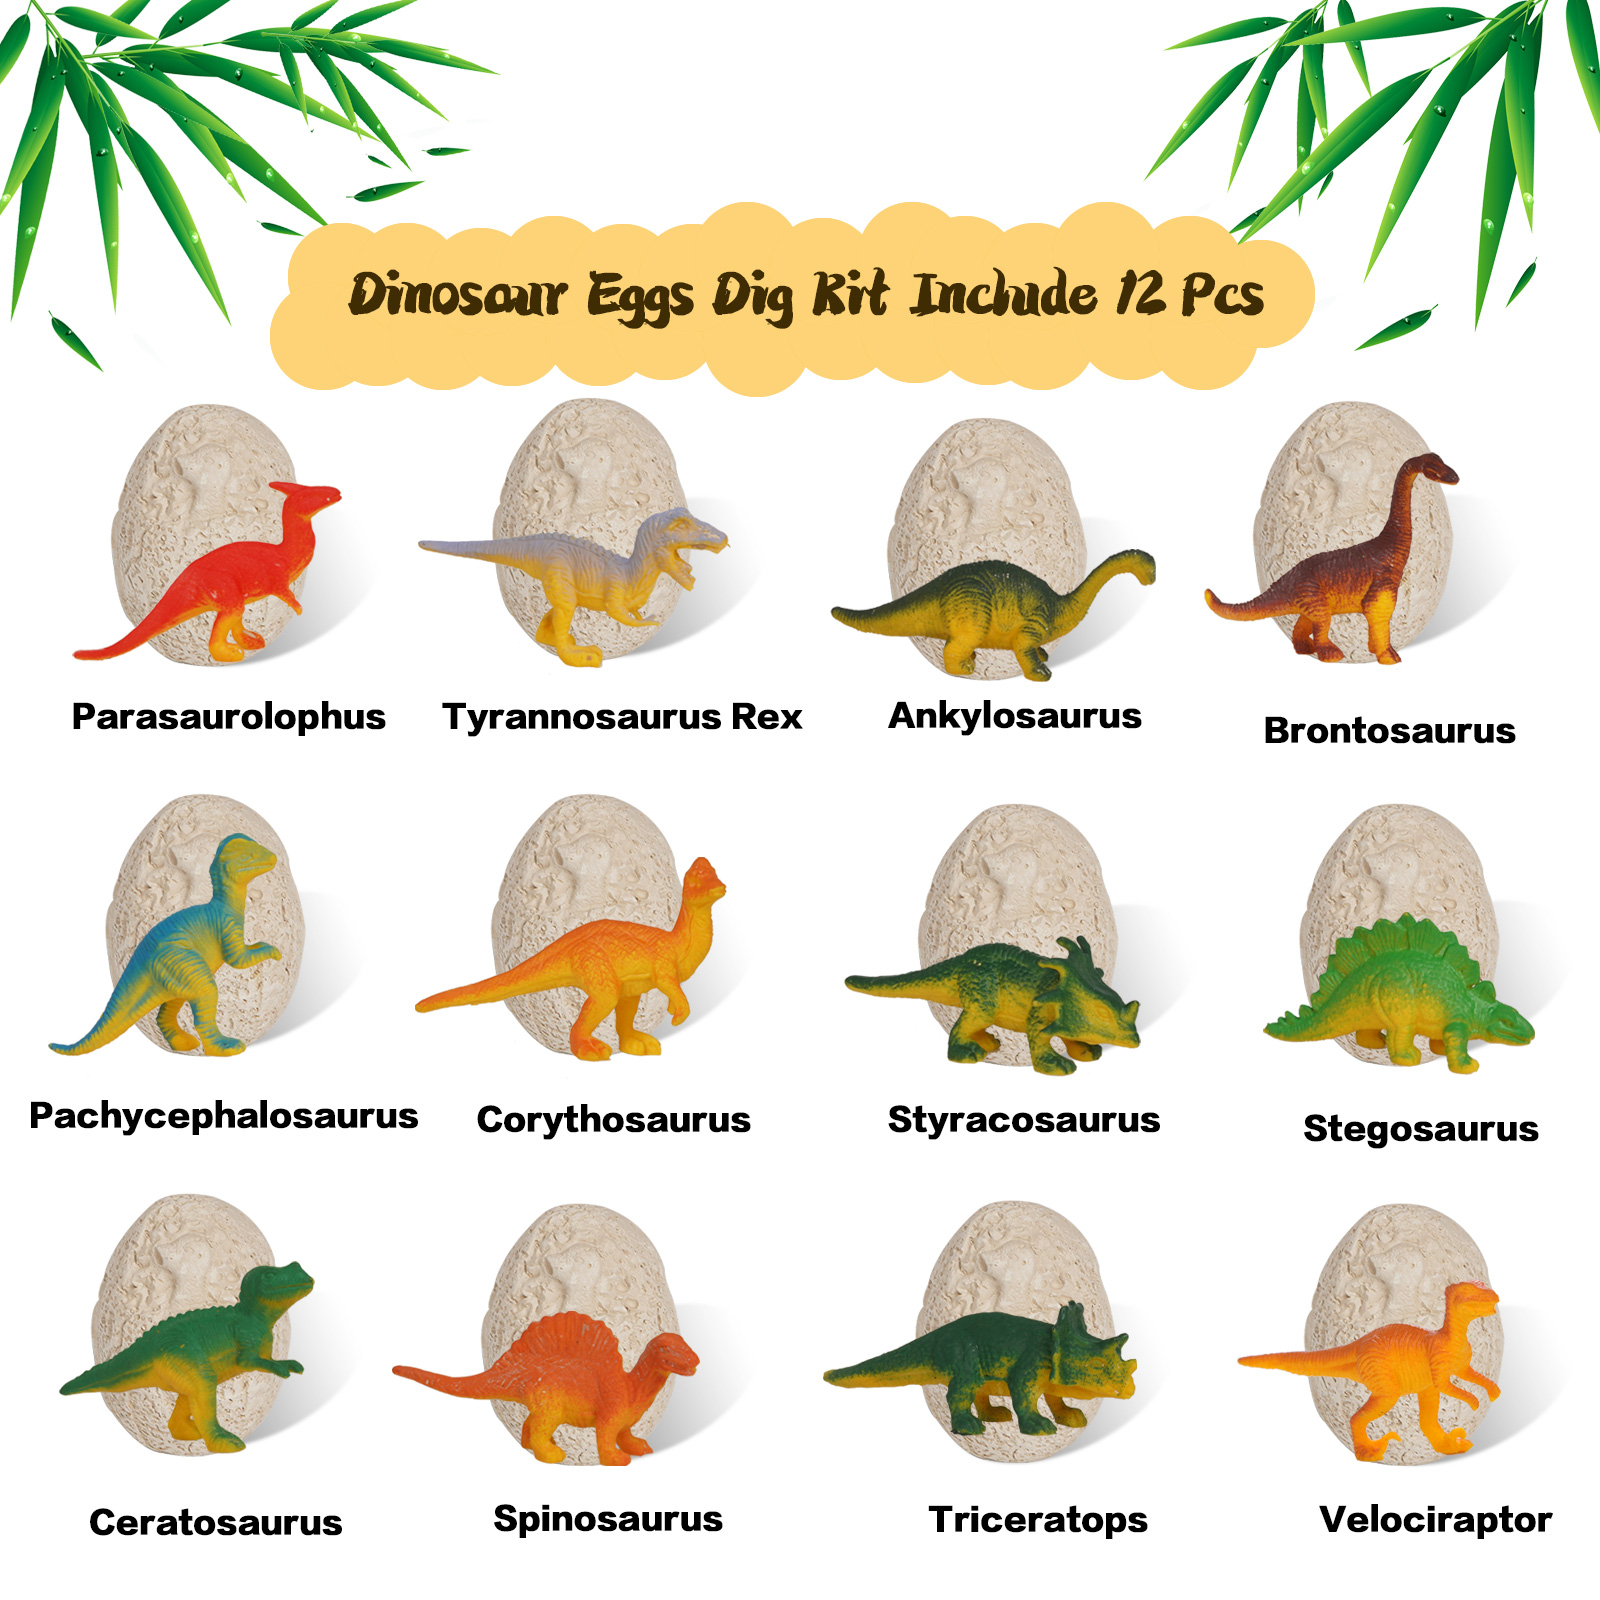 Dinosaur Egg Excavation Dig It Out Dinosaur Fossil Toys 12 Dino Eggs Dig Set Science Educational Kits STEM Toys For Kids 